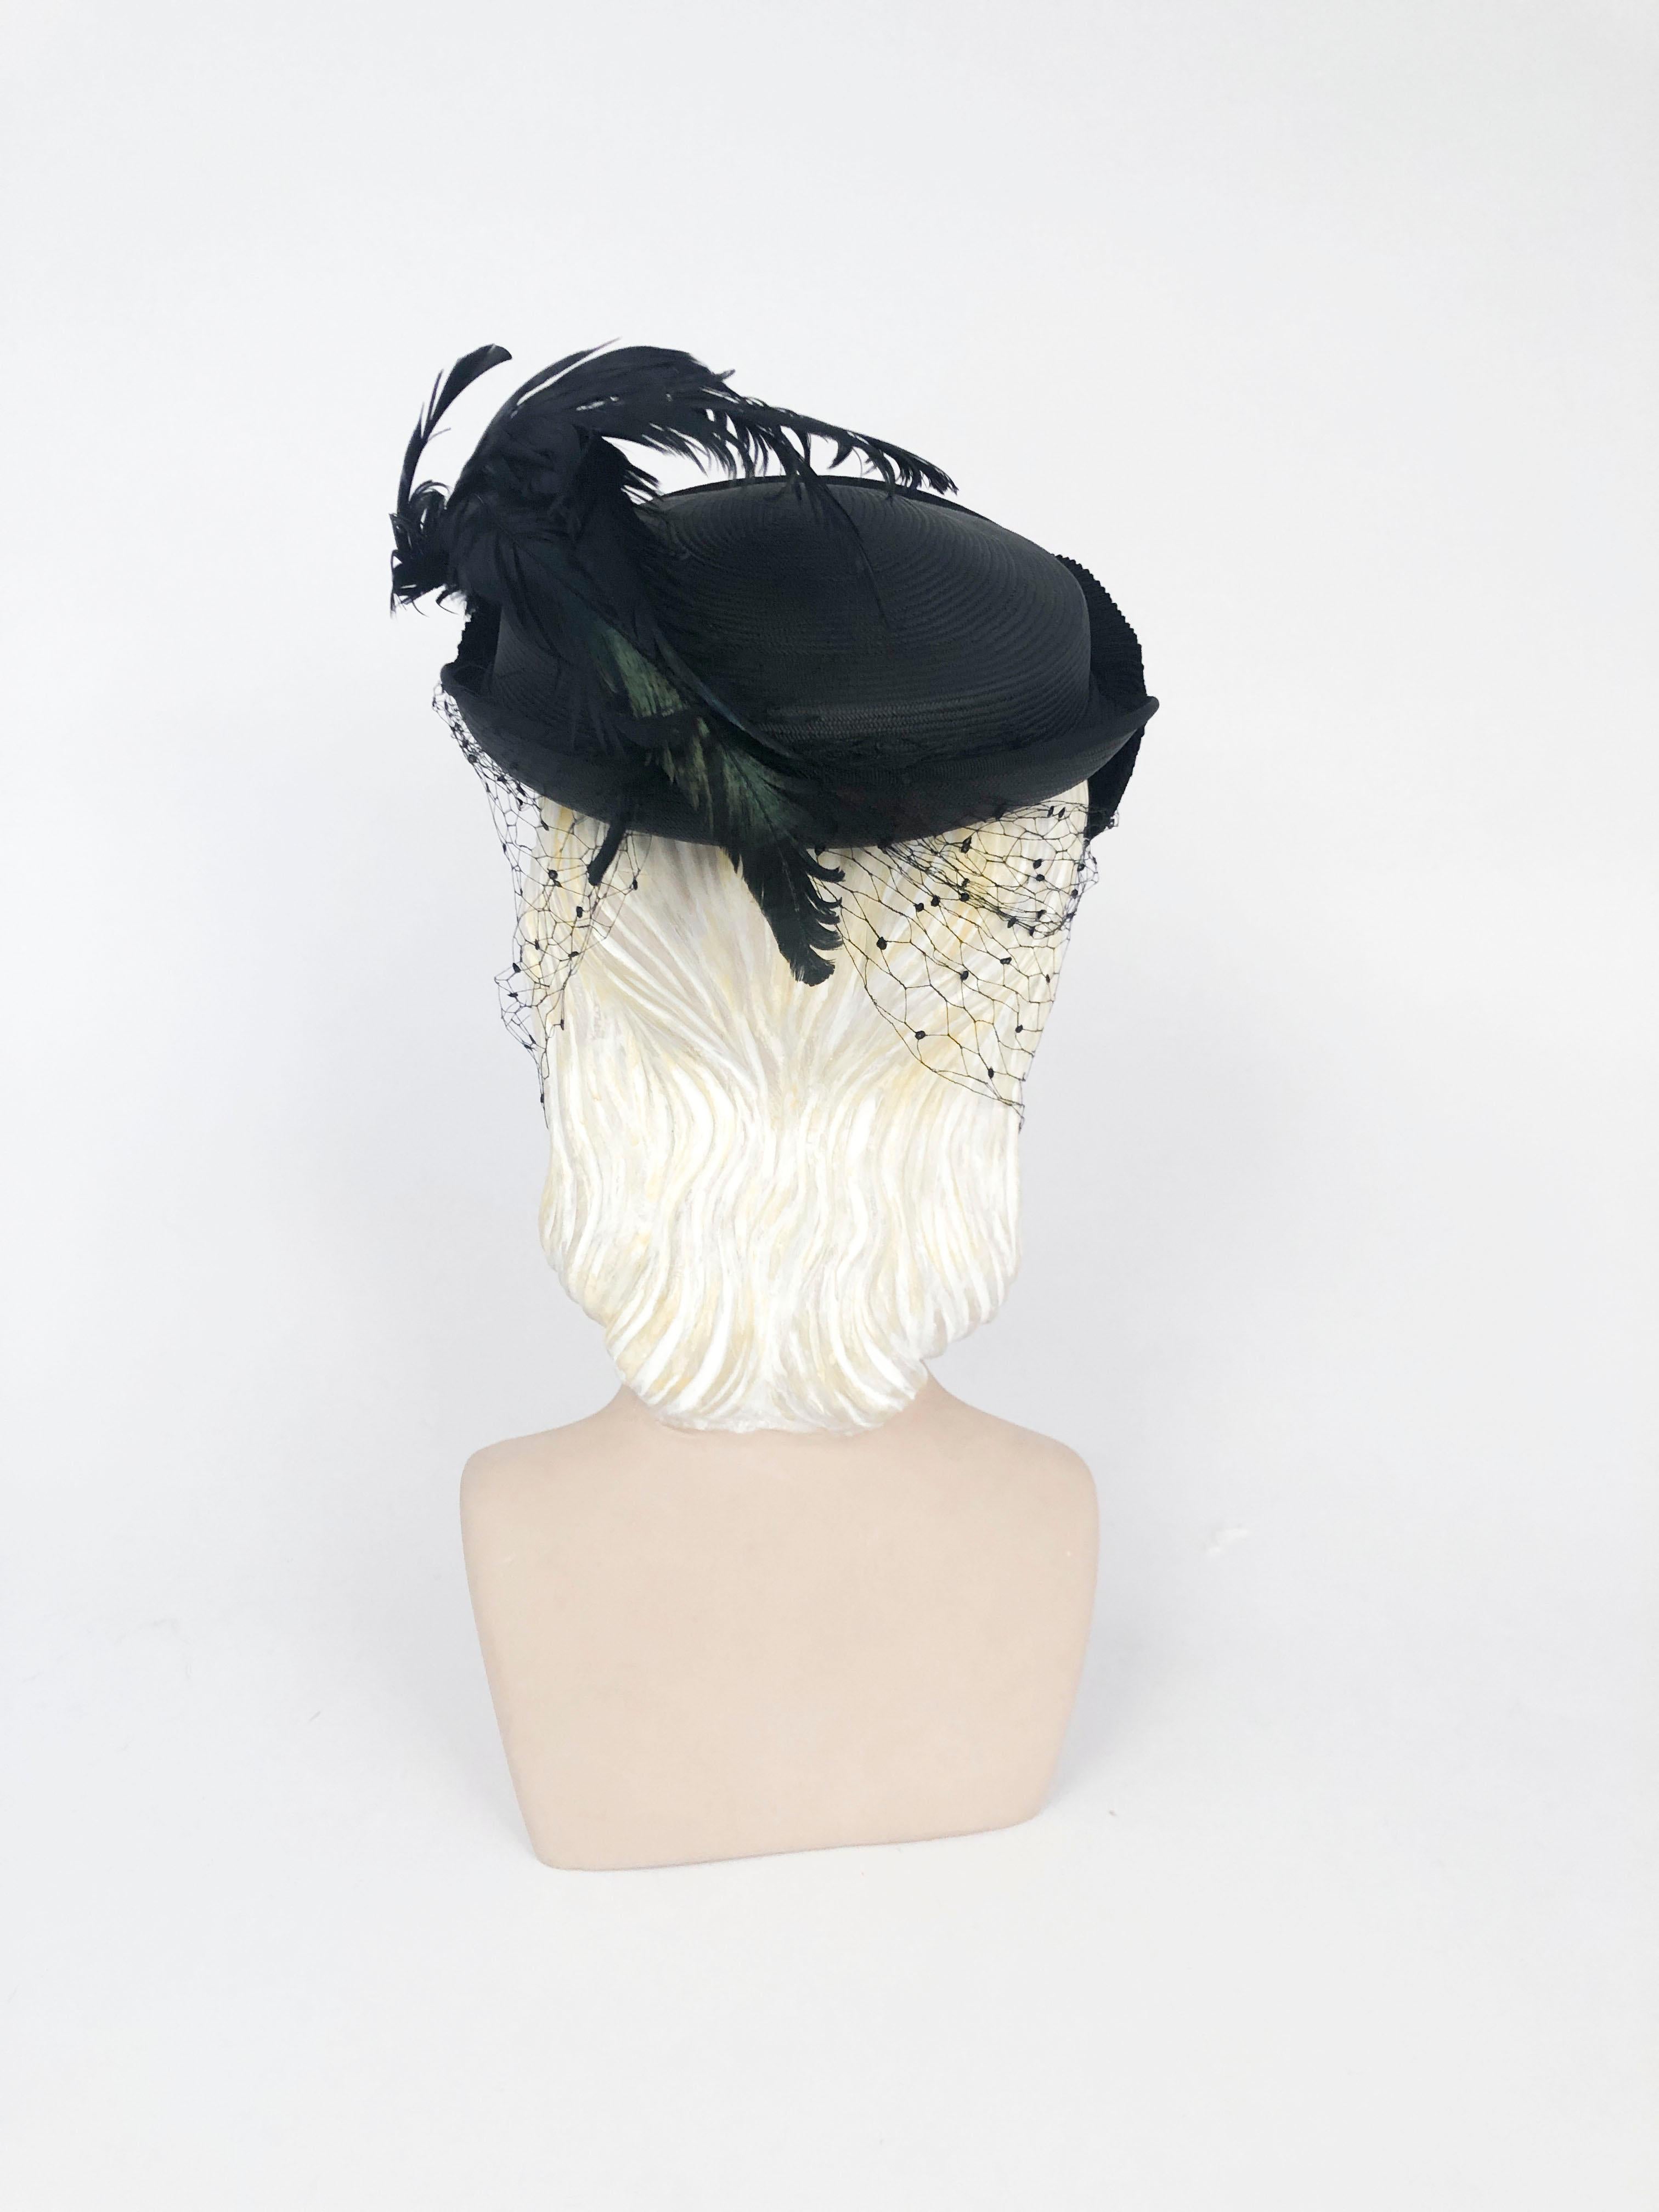 Women's 1950s Black Panama Straw Hat with Ruched and Feather Accents